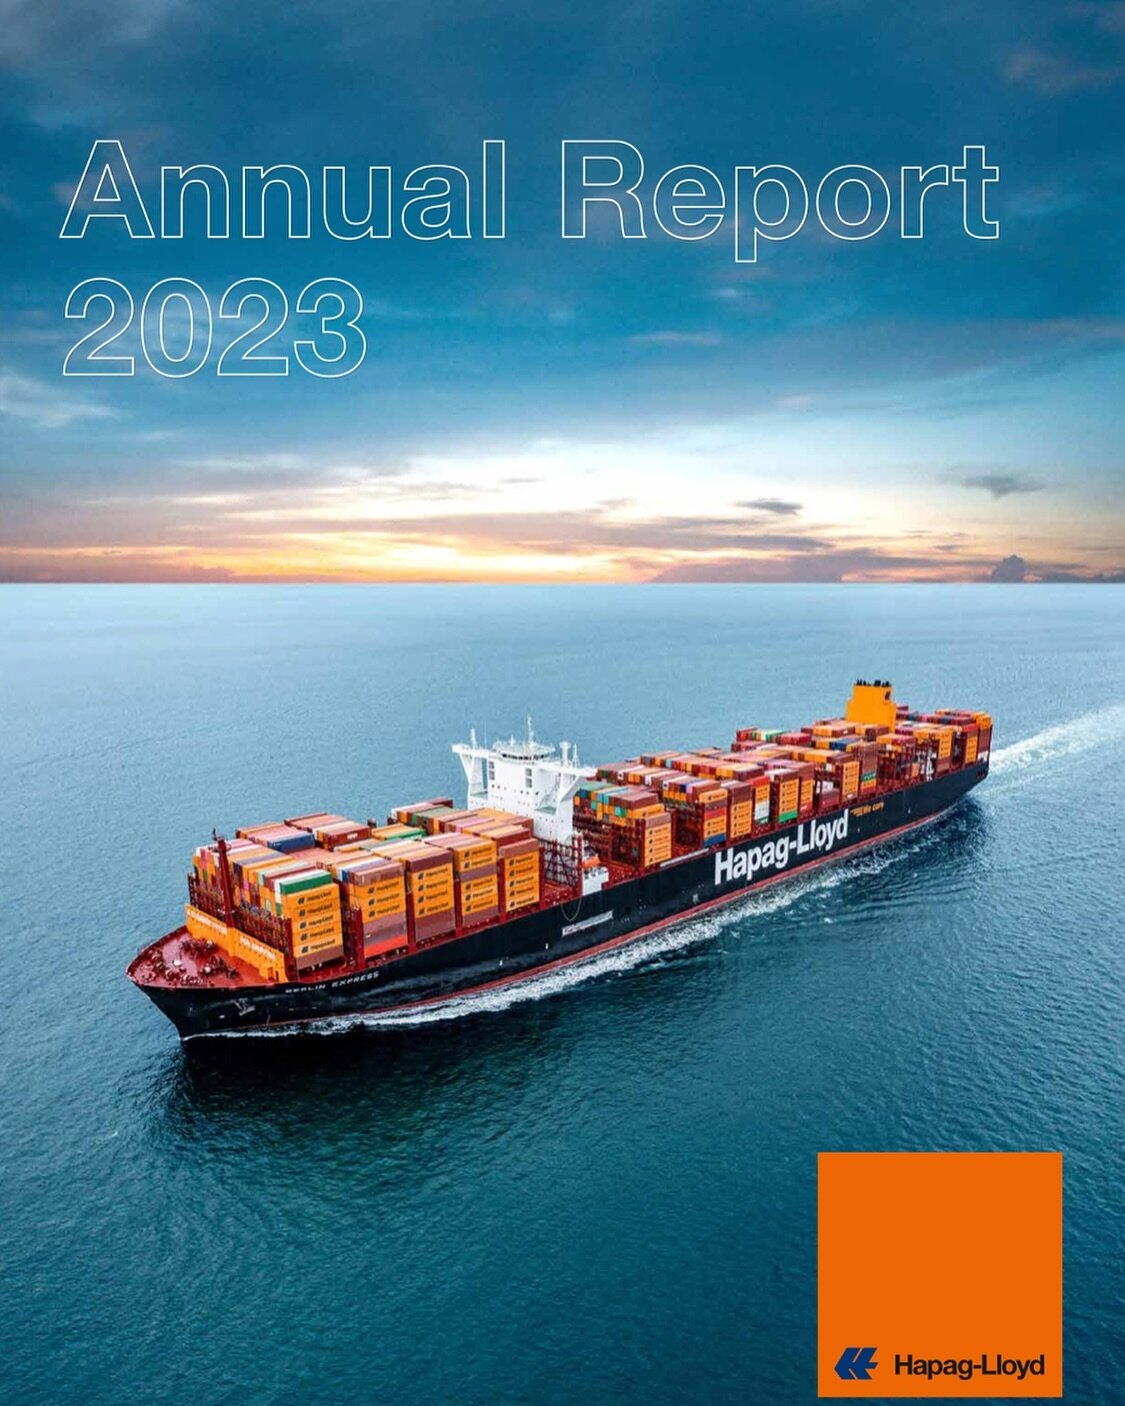 Sailing into success with Hapag Lloyd on their annual report&rsquo;s cover page.
Photography by Flyht Studio

⛴️ #hapaglloyd #annualreport #maritime #shipping #ships #shipspotter #shipspotting #ocean #seafarer #sealife #sea #container #vessel #sail #